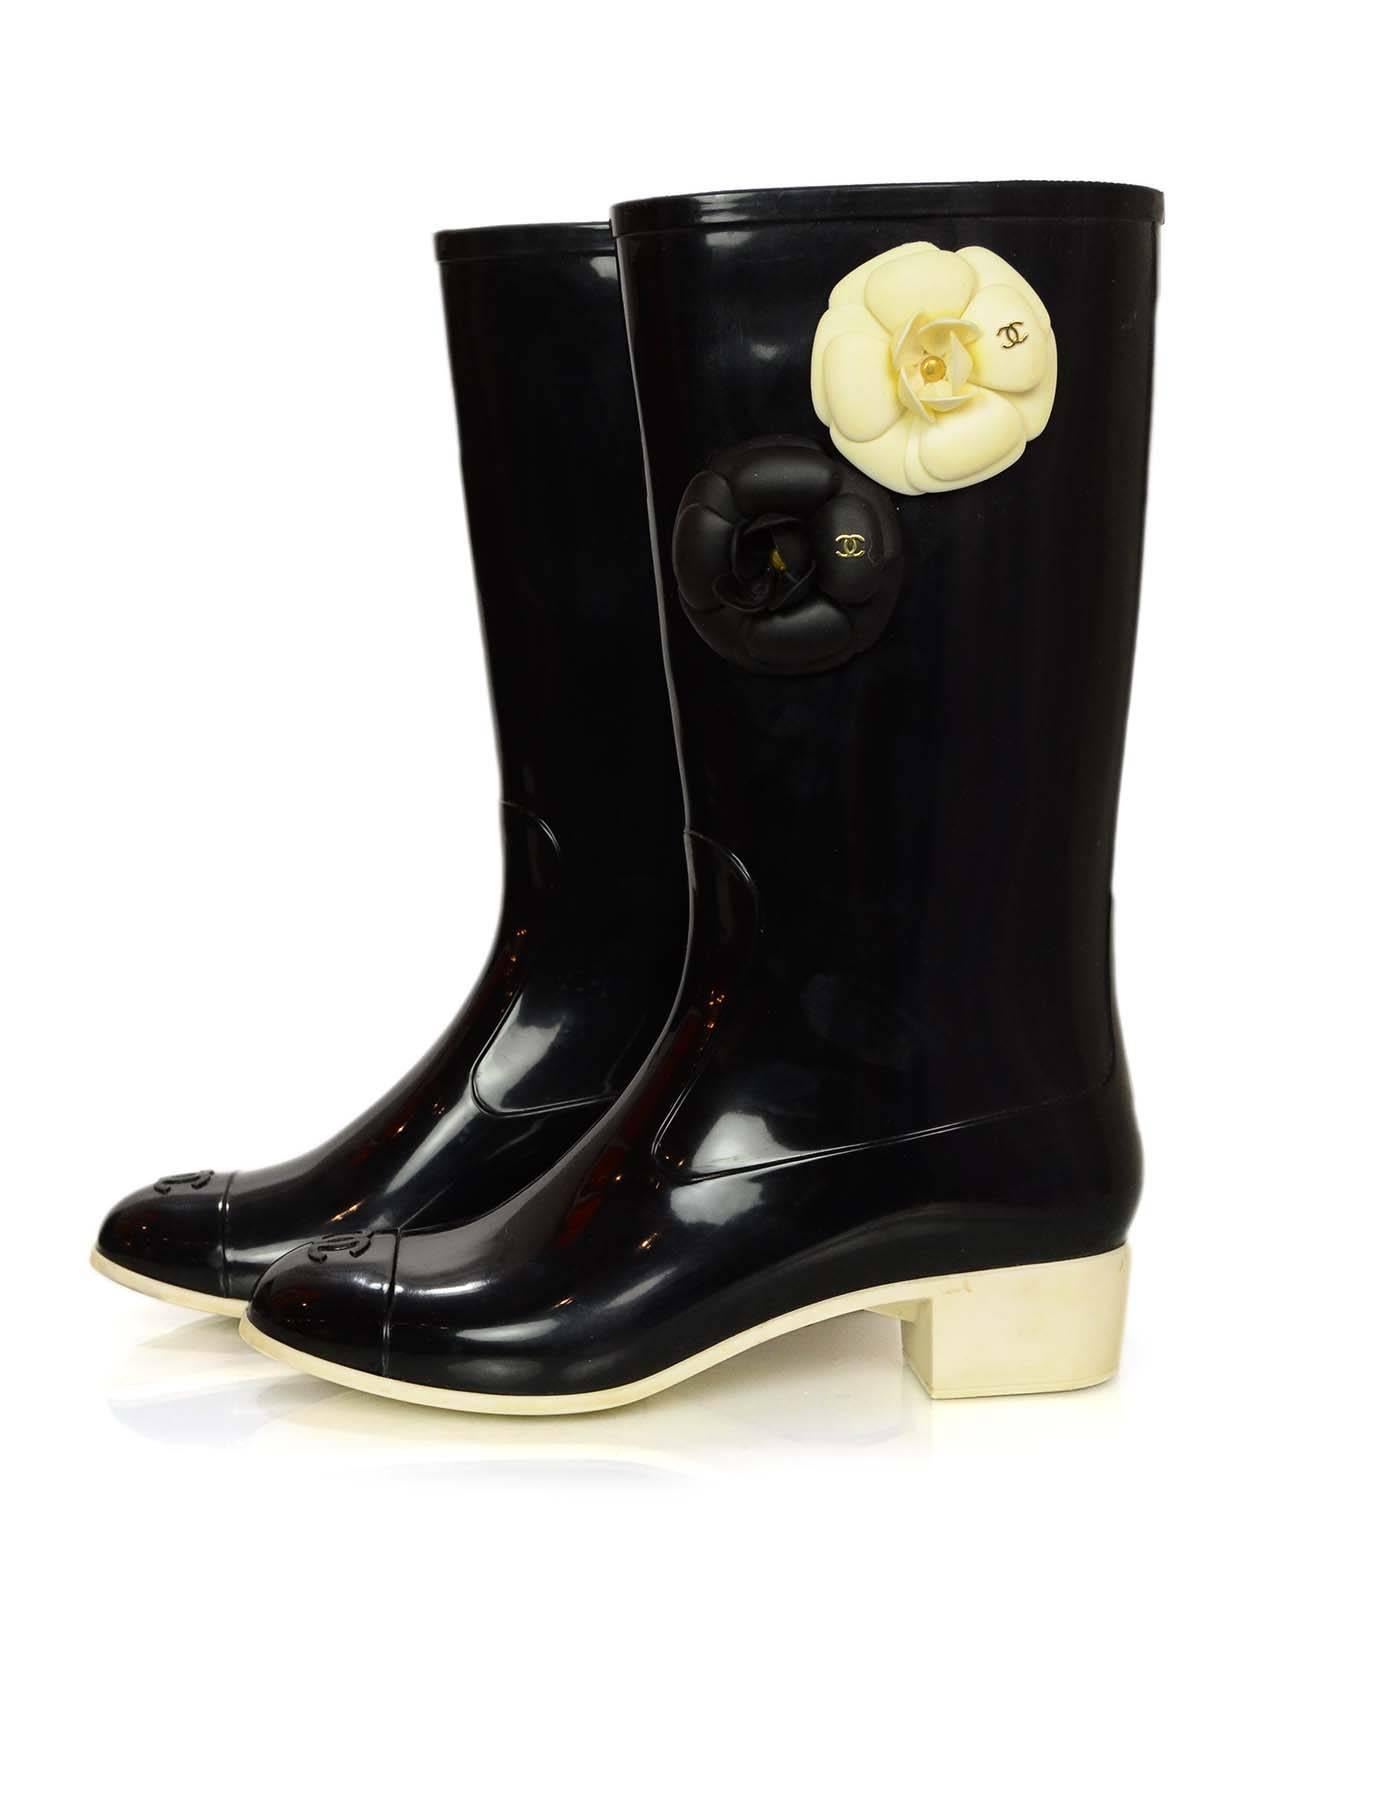 Chanel Black and White Camellia Rain Boots Sz 40
Features black and white camellia flowers

Made In: Italy
Color: Black and white
Materials: Rubber
Closure/Opening: Pull on
Sole Stamp: CC 40 made in italy
Overall Condition: Excellent